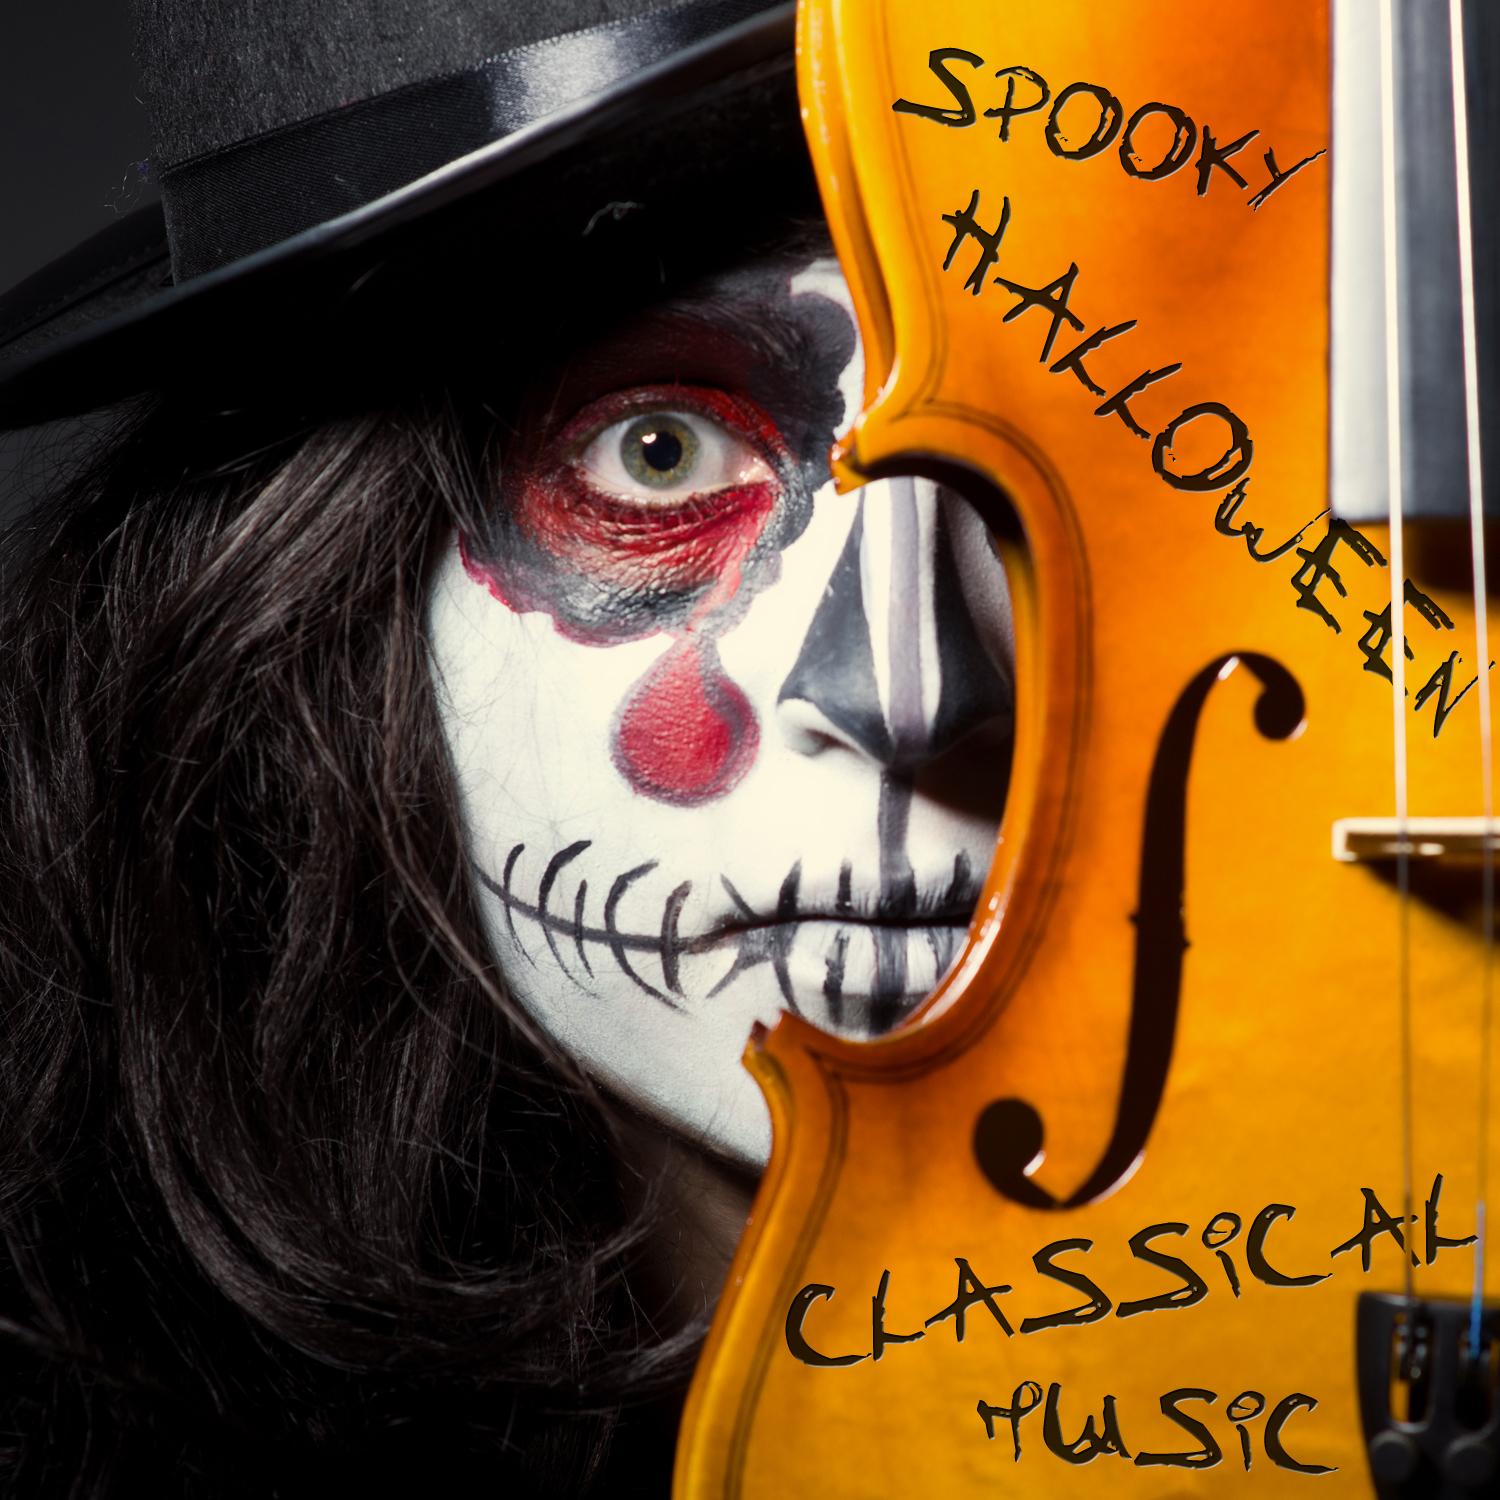 Spooky Halloween Classical Music: 20 Scary Songs To Scare Kids Including Toccata and Fugue, Carmina Burana, & the Mozart Requiem